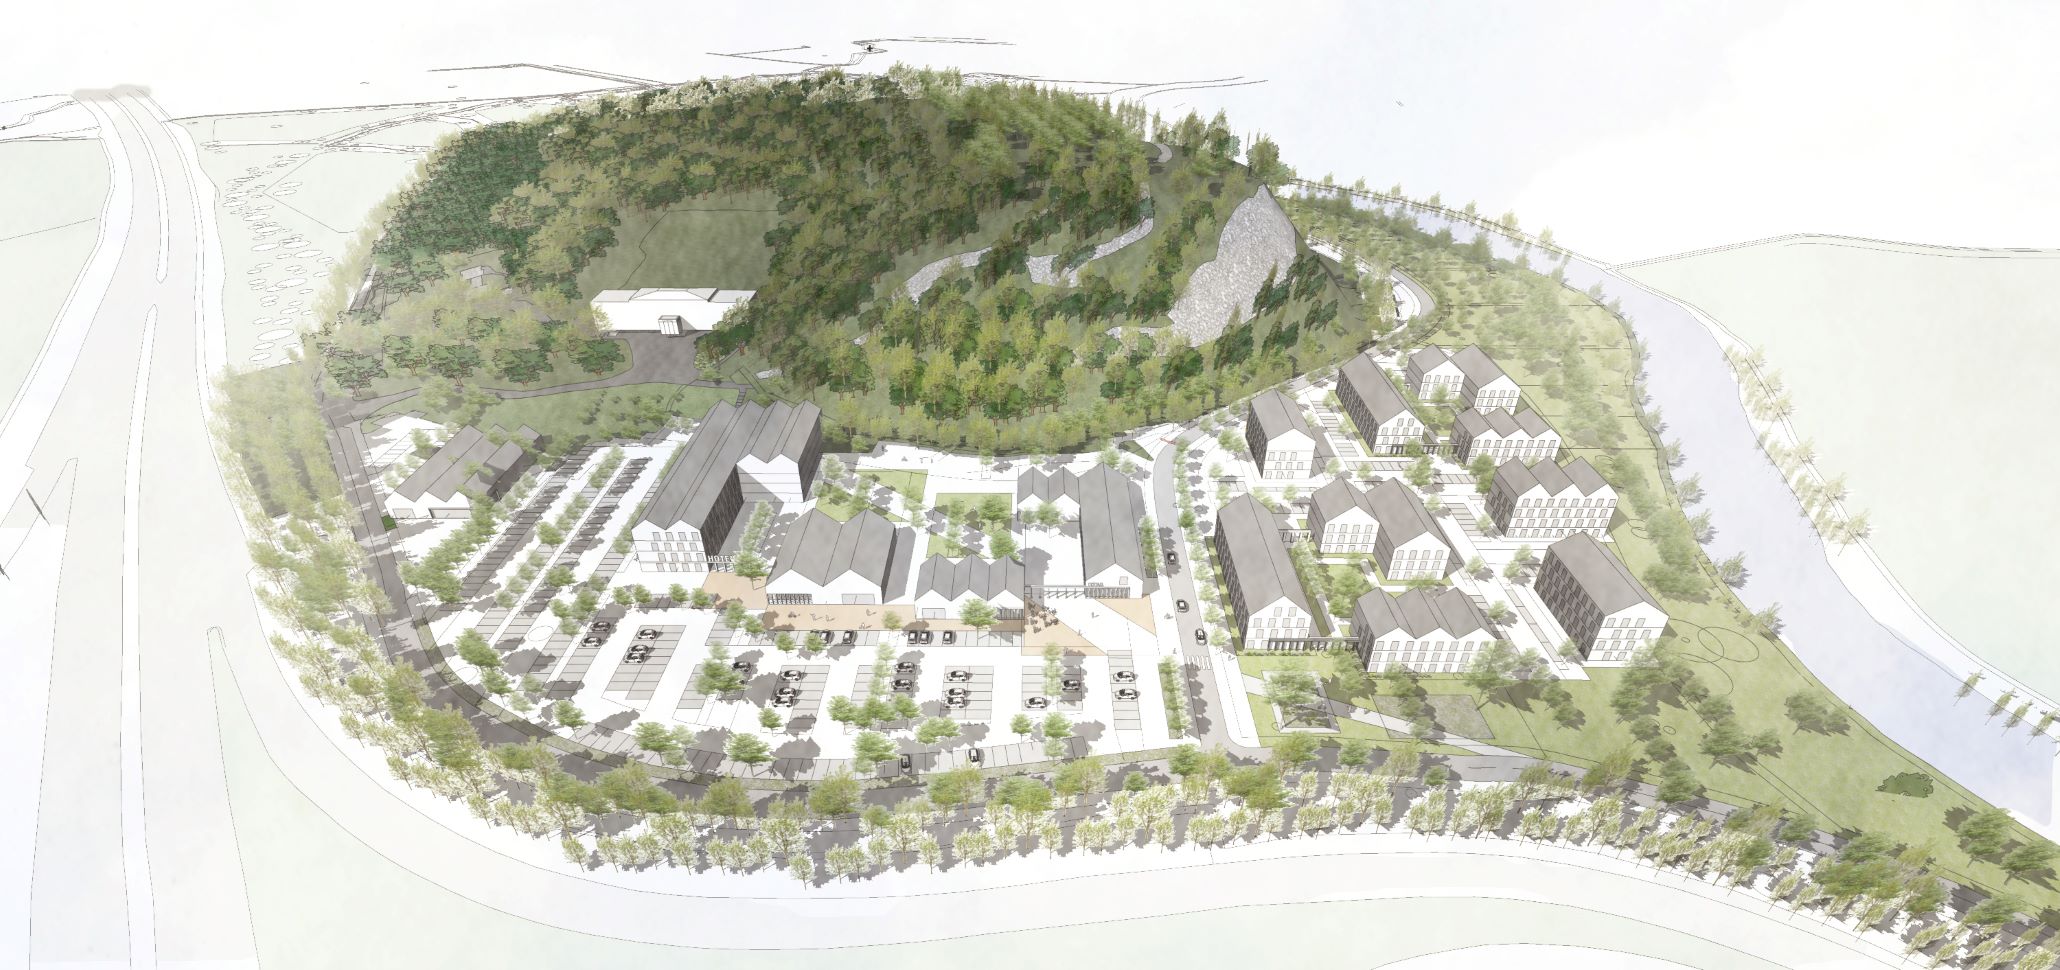 Vision for Stirling’s Craigforth Campus revealed ahead of virtual consultation